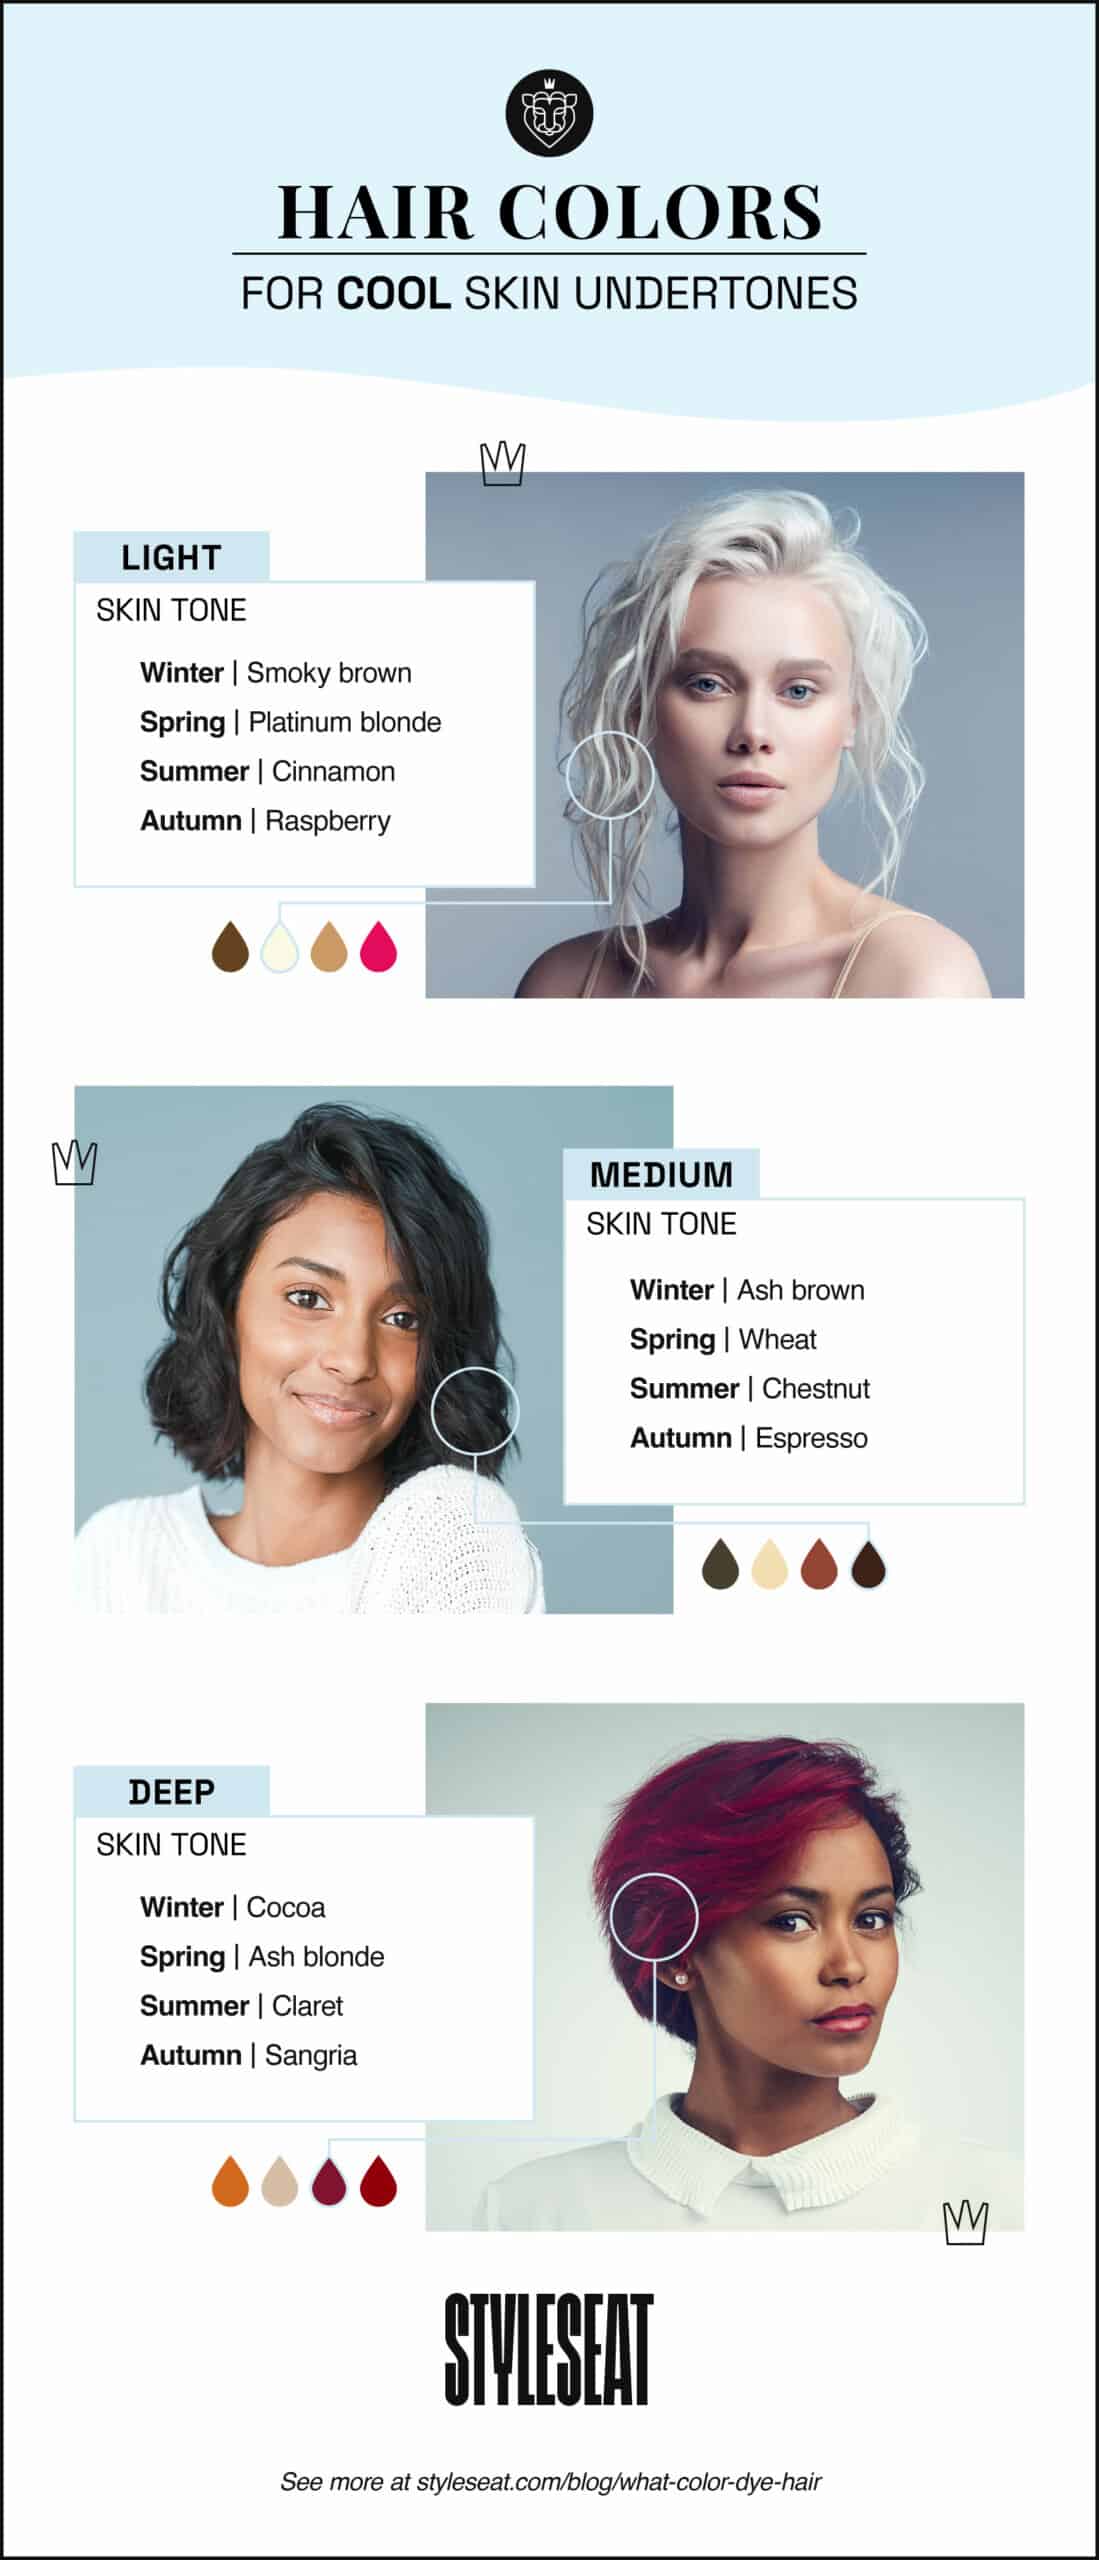 What Color Should I Dye My Hair? Take Our Quiz - StyleSeat